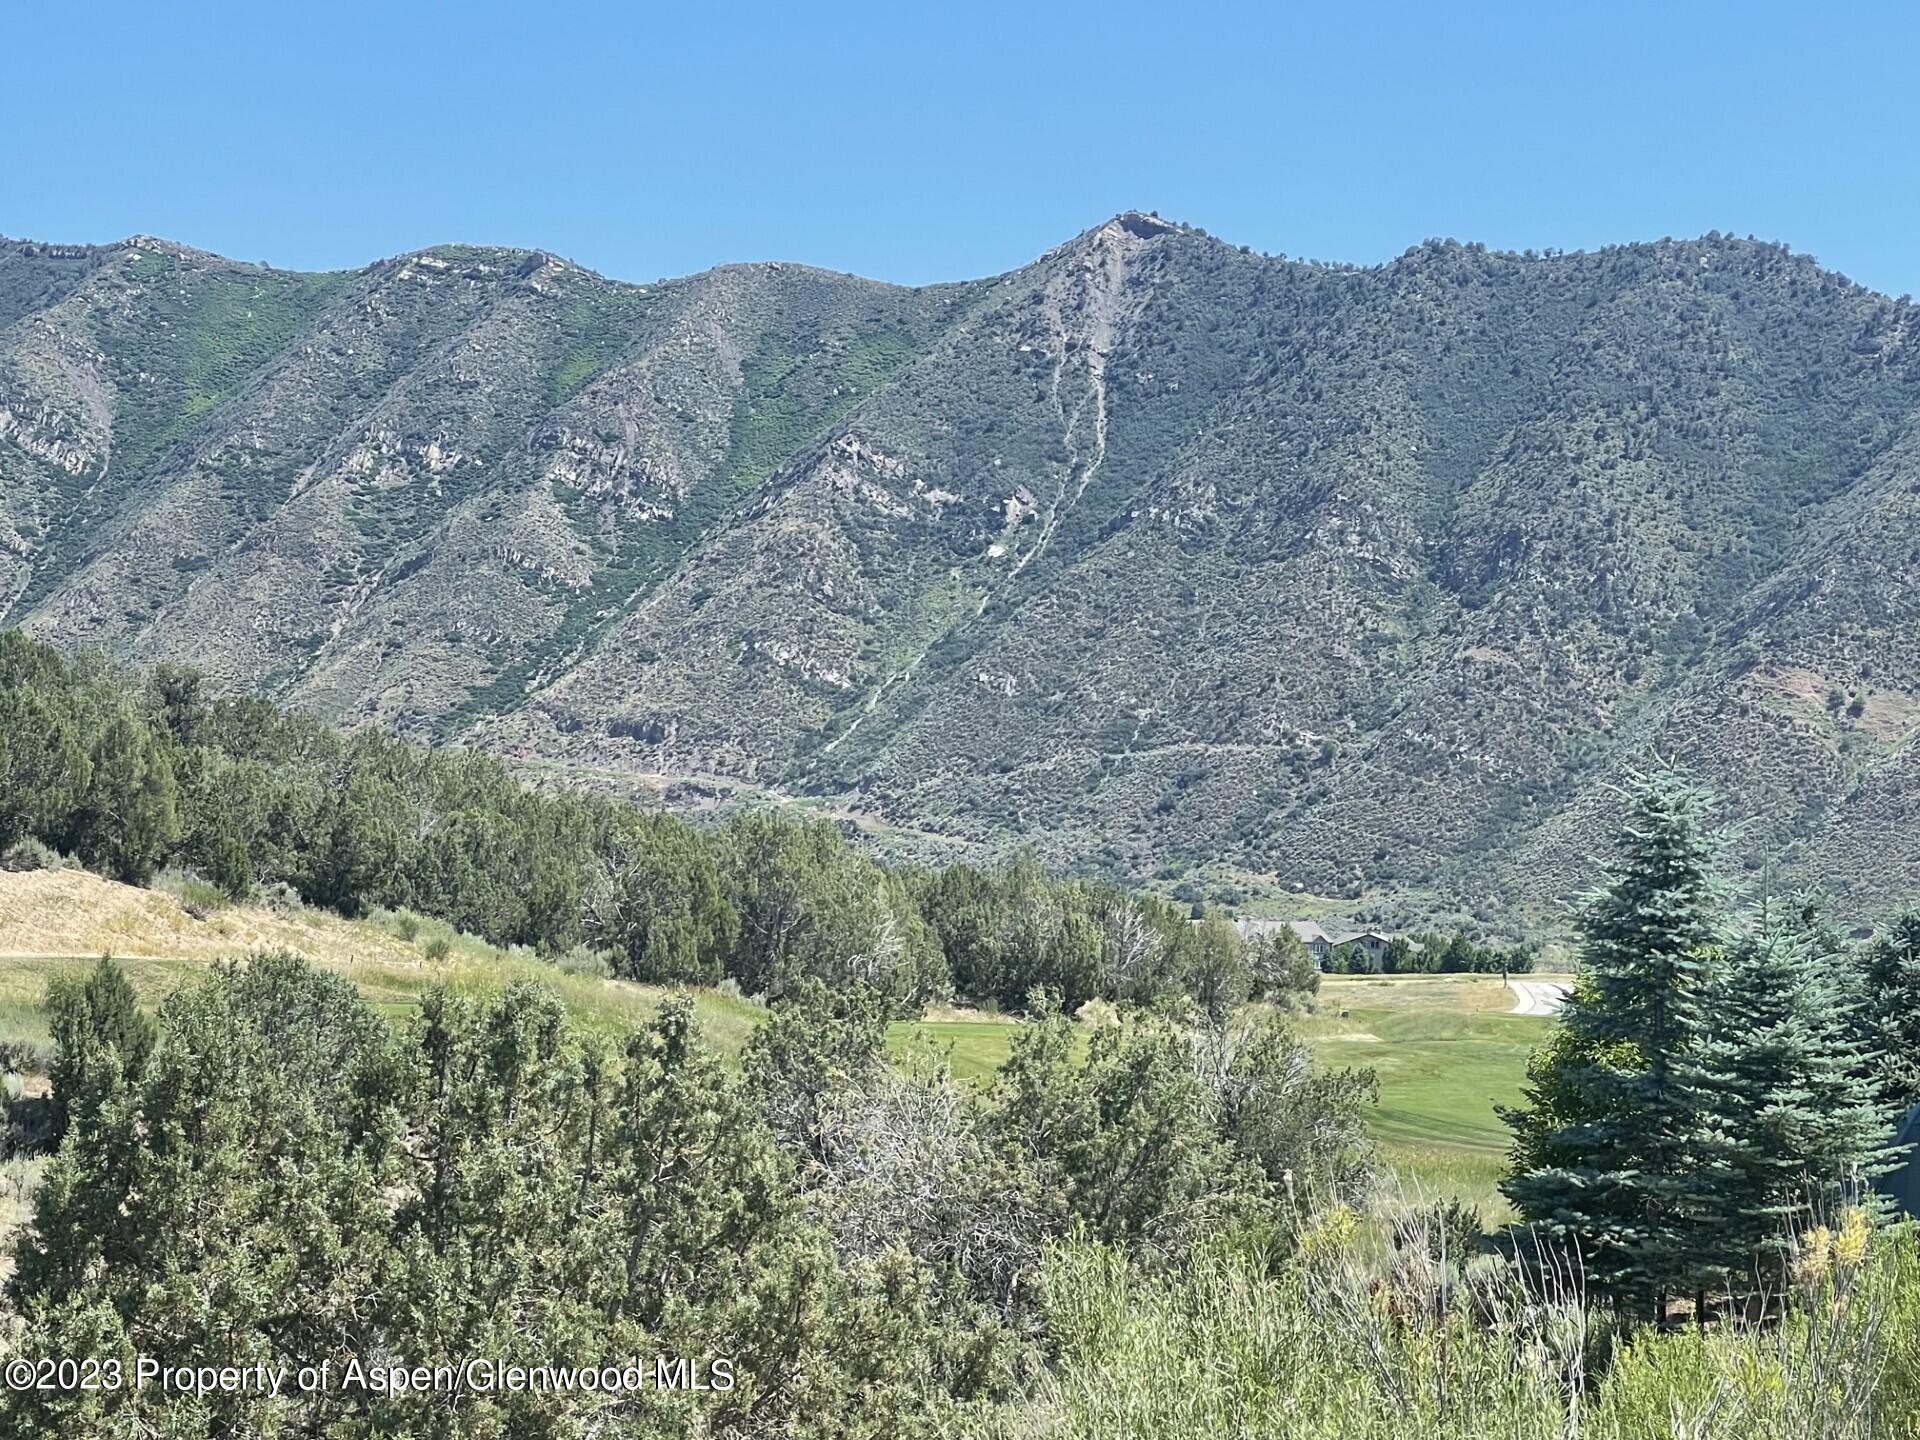 a view of a mountain range with trees